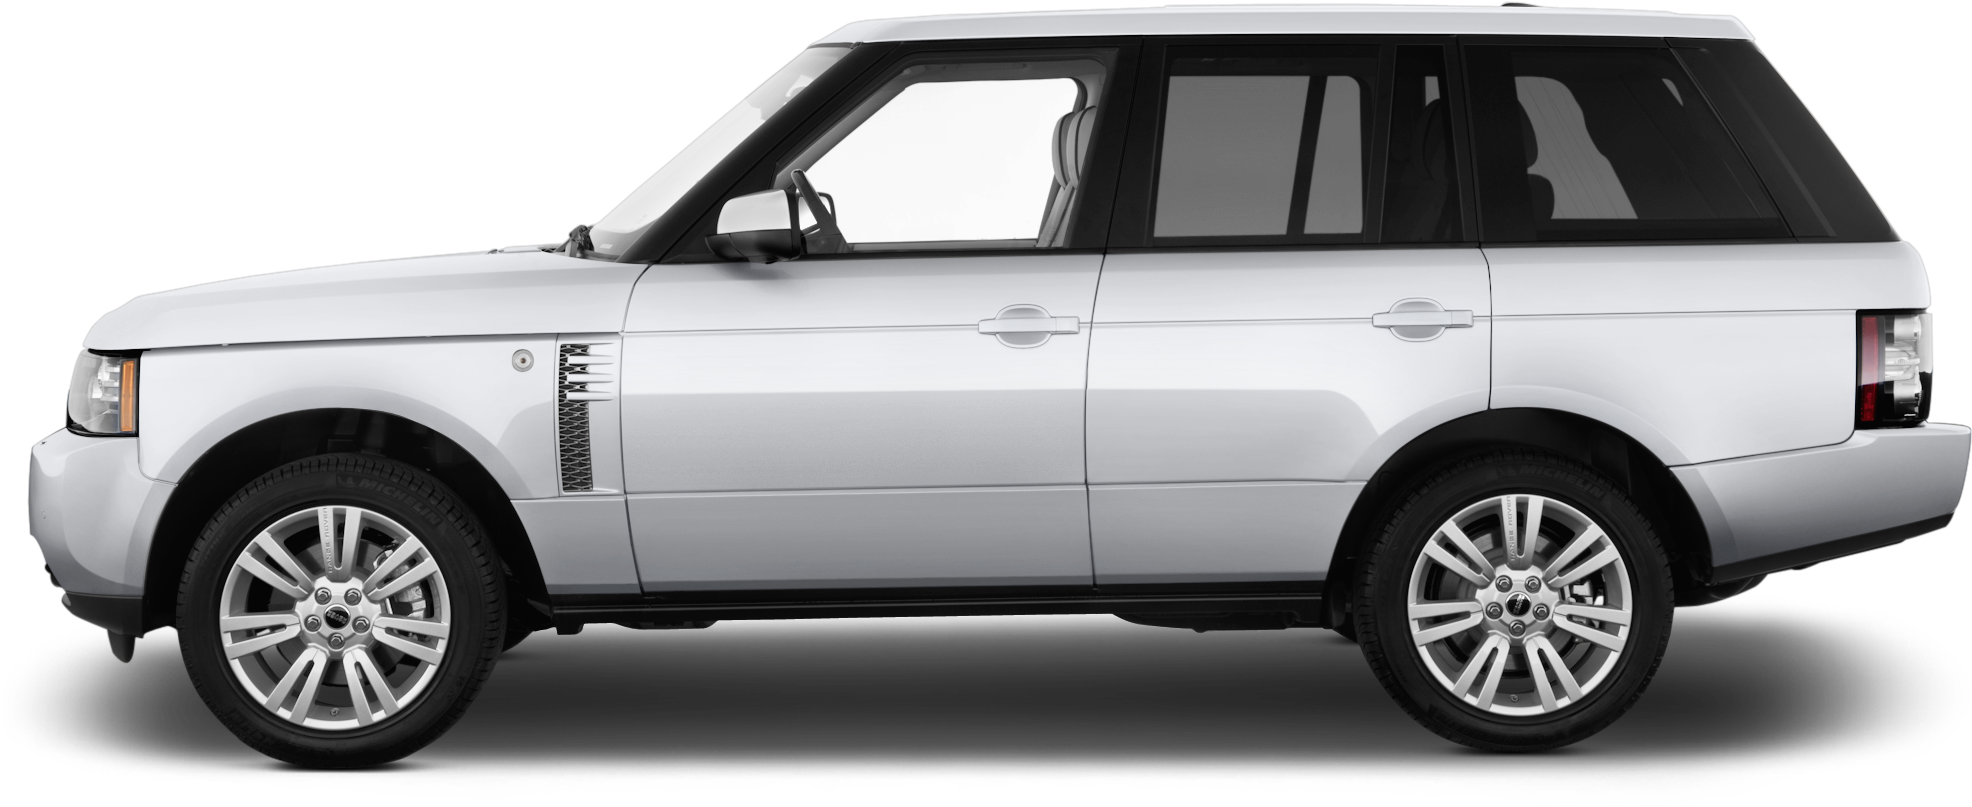 Land Rover Range Rover PNG Free Download